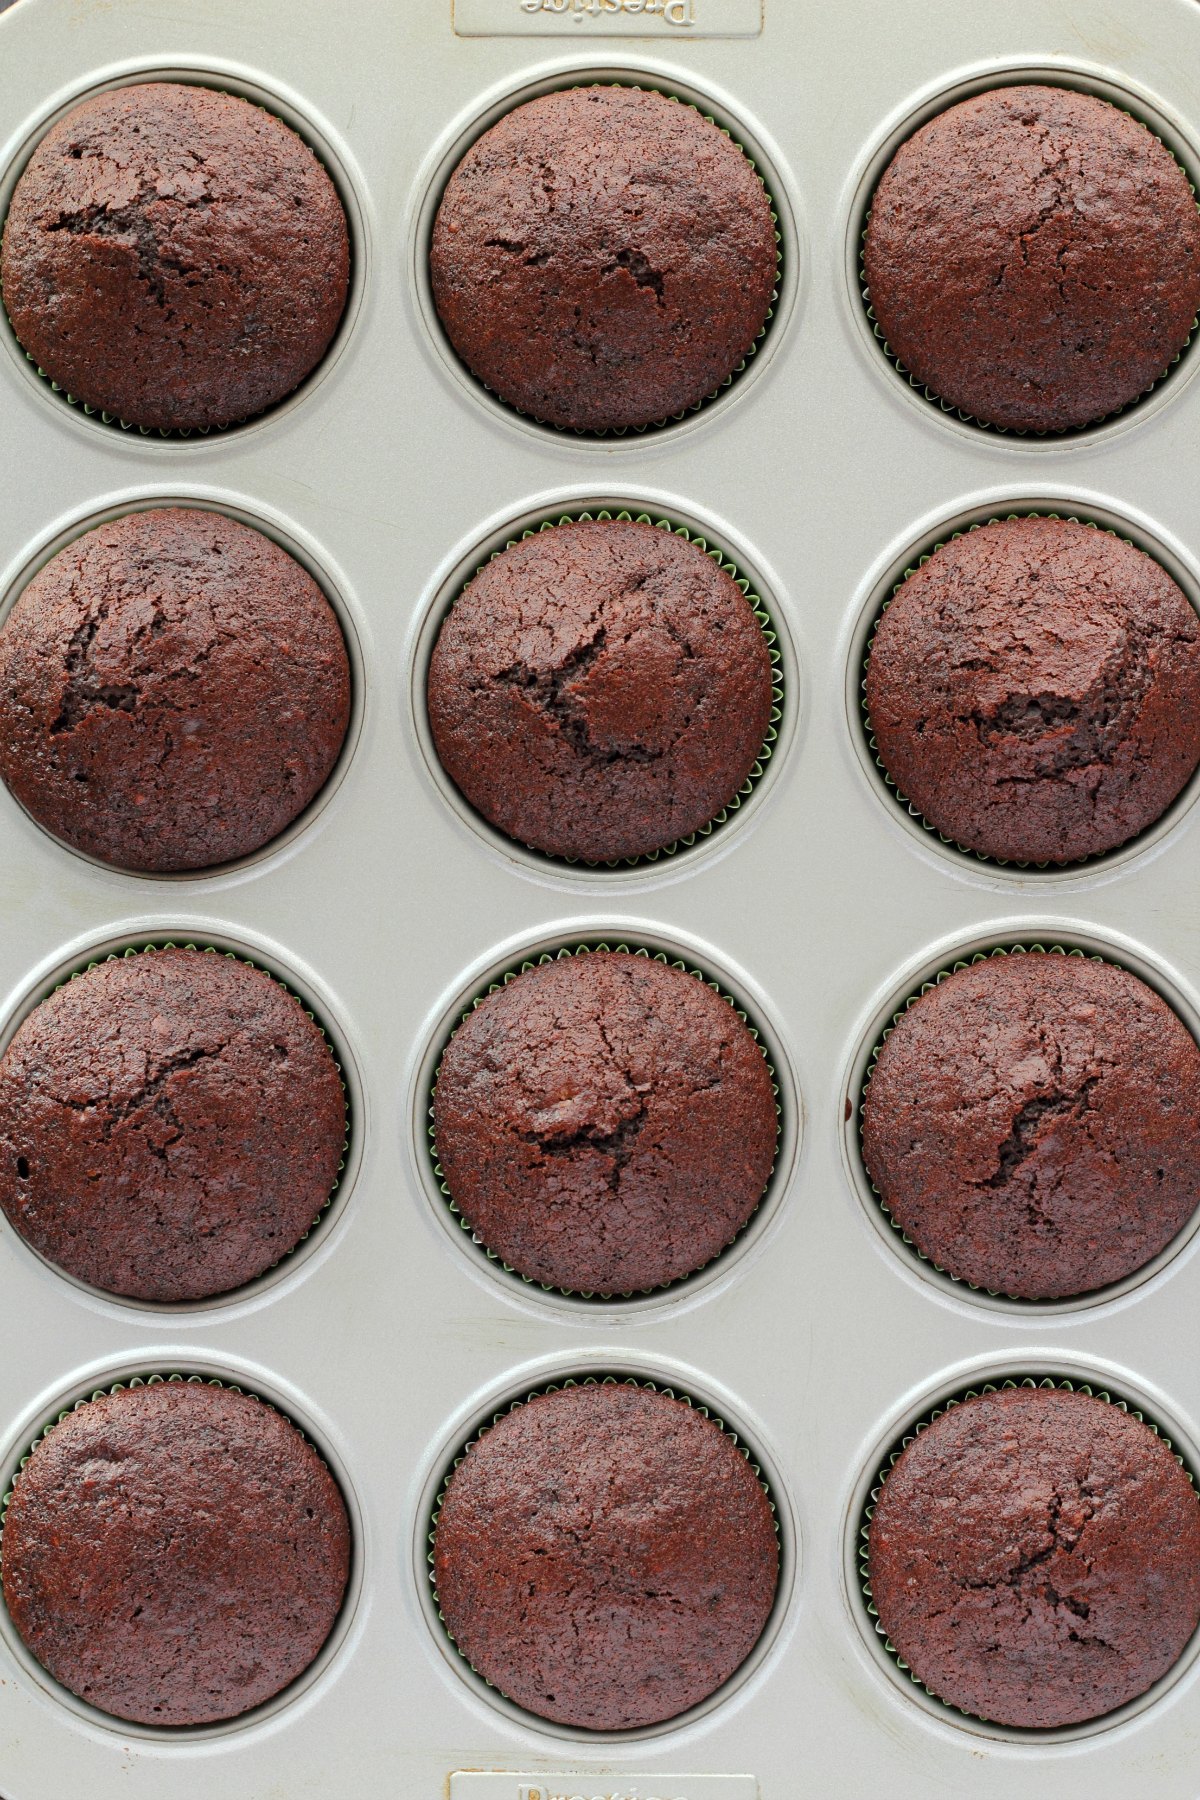 Baked chocolate cupcakes in a cupcake tray.